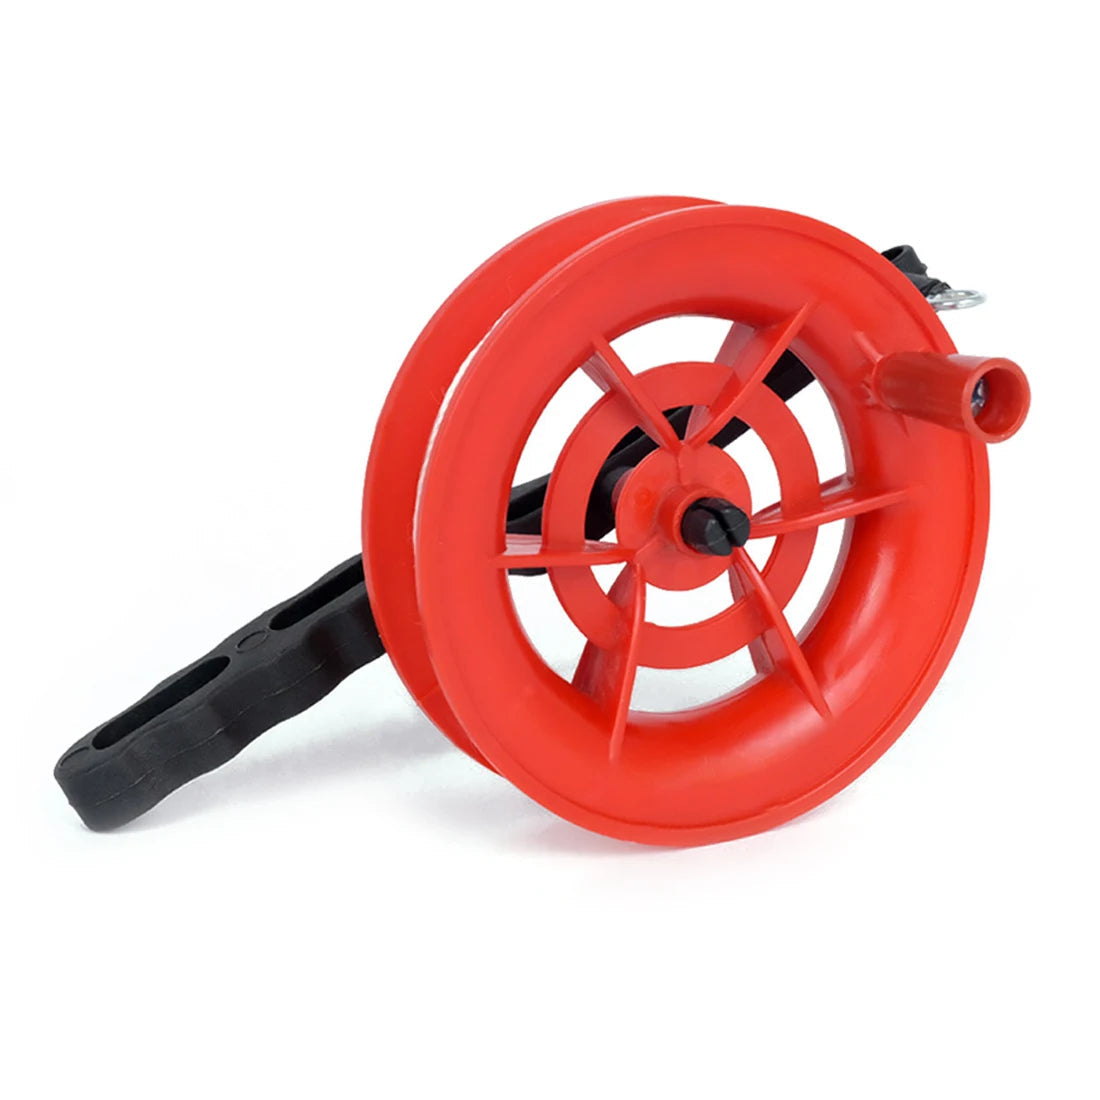 High Quality 15cm~26cm Kite Reel & Line Set with Ball Bearing and ABS Plastic - ToylandEU